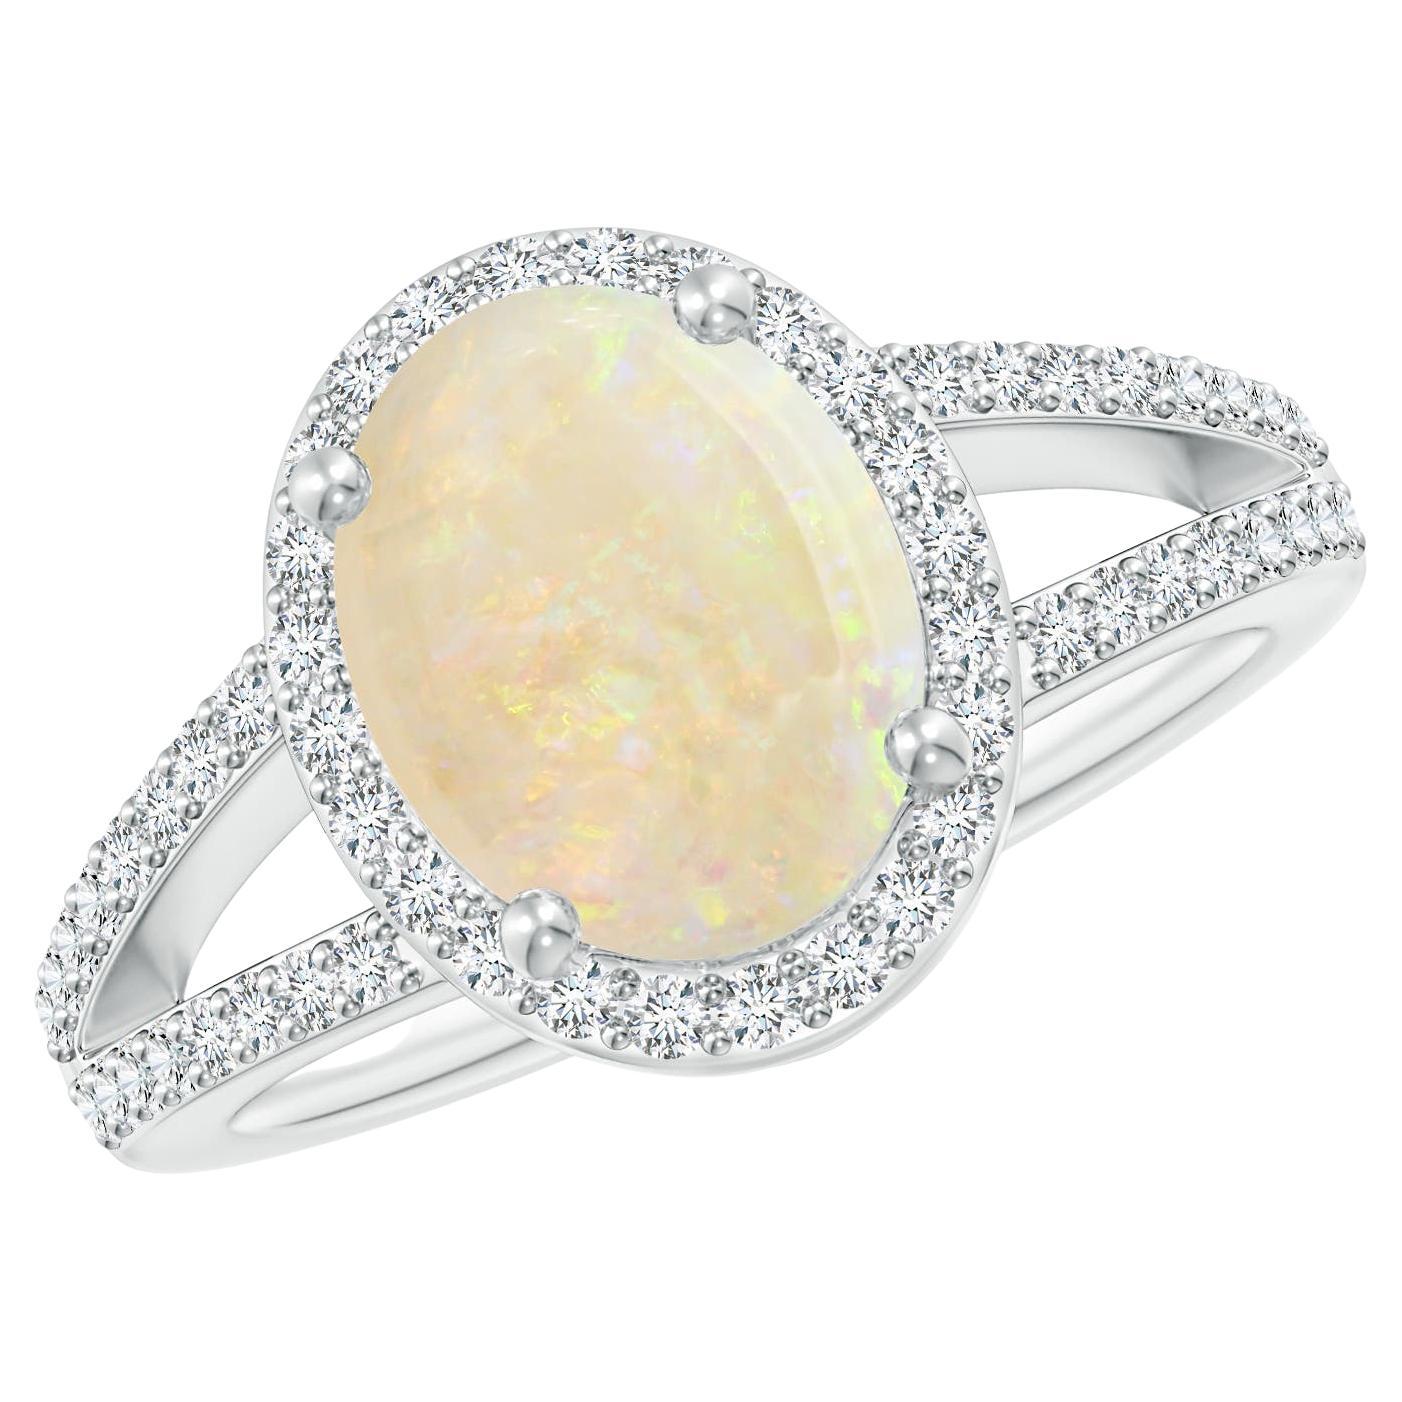 For Sale:  Angara Gia Certified Natural Opal Split Shank Halo Ring in White Gold